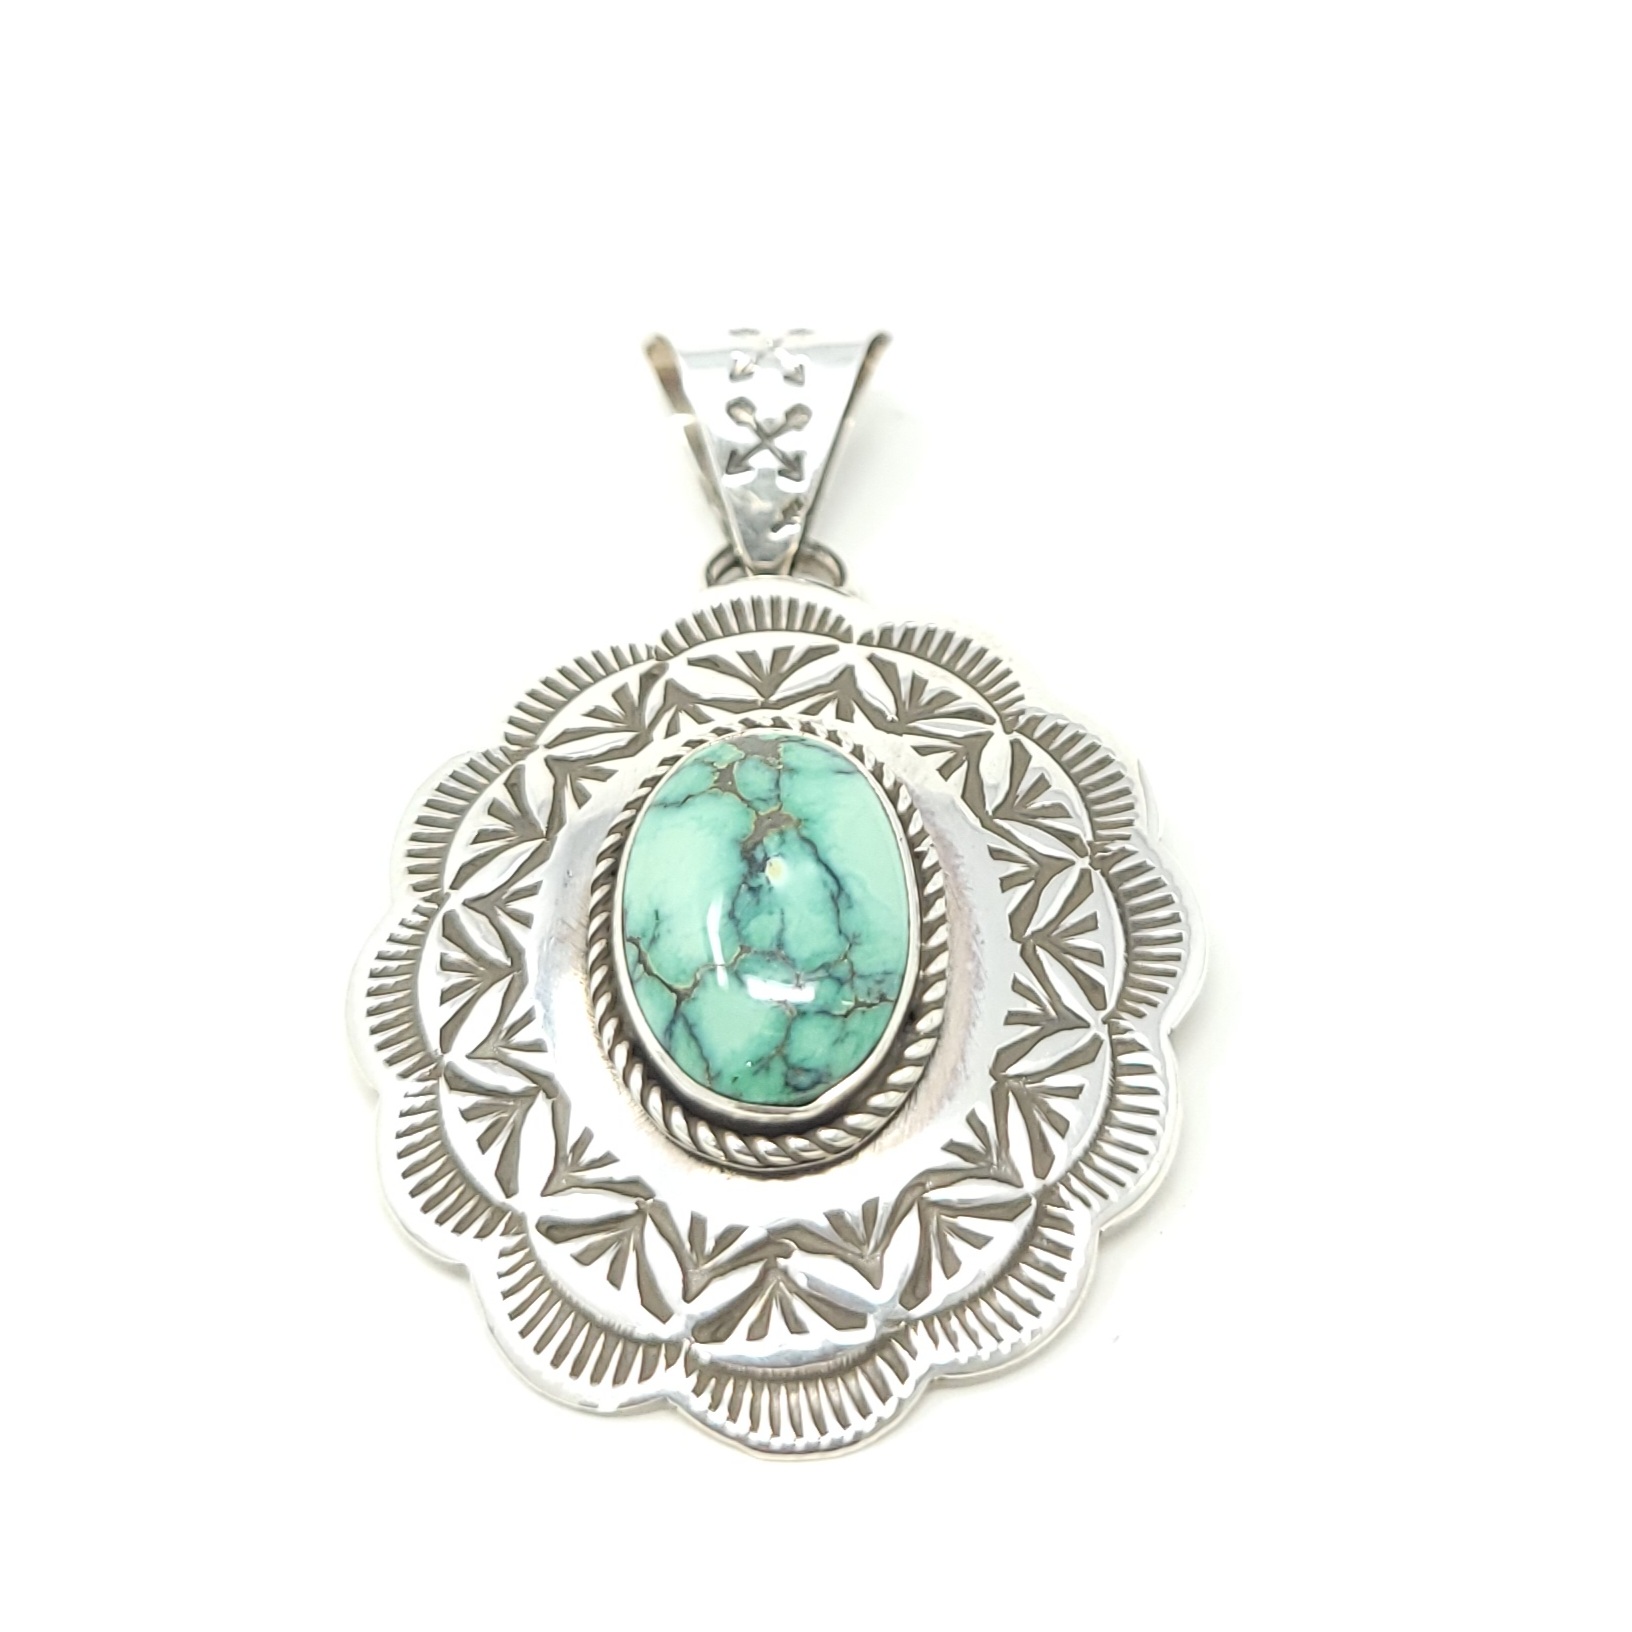 Adrian Reeves Long Navajo Sterling Silver Concho Style Pendant Peacock Variscite